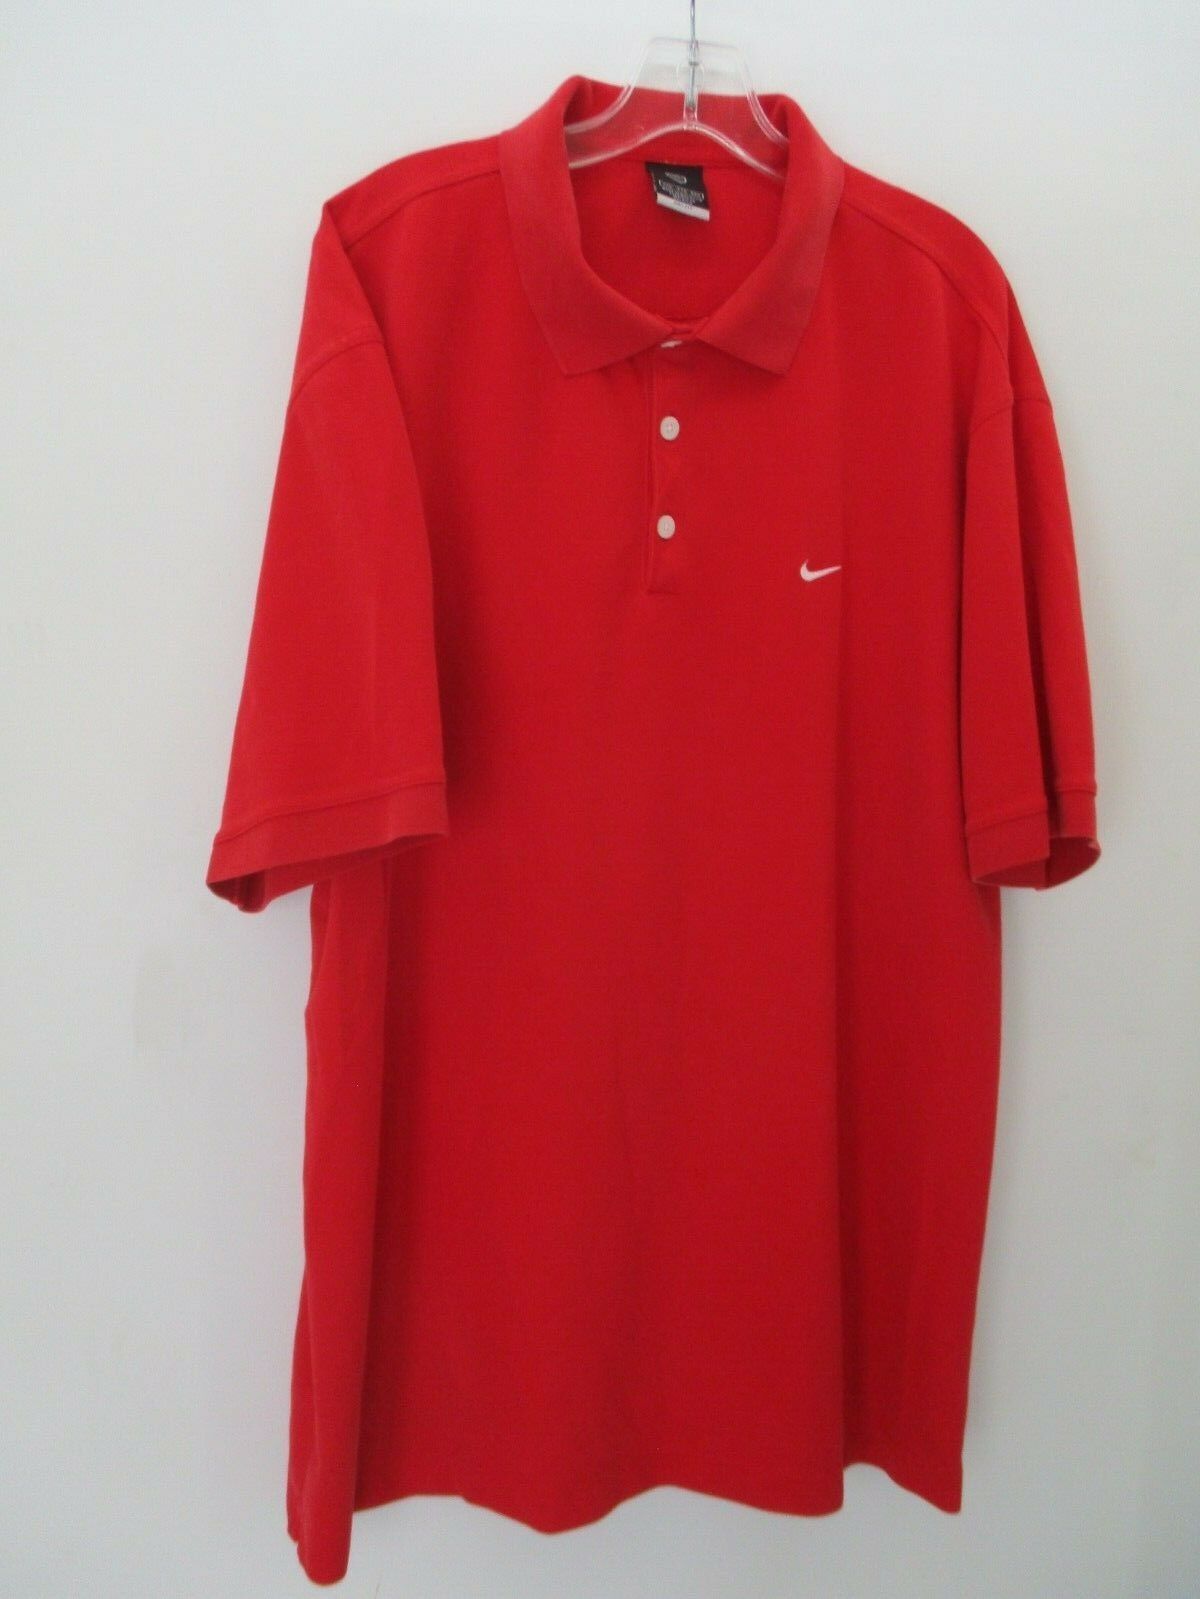 Dry Fit Nike Men's 2XL XXL Cotton Short Sleeve Solid Red Polo Shirt ...